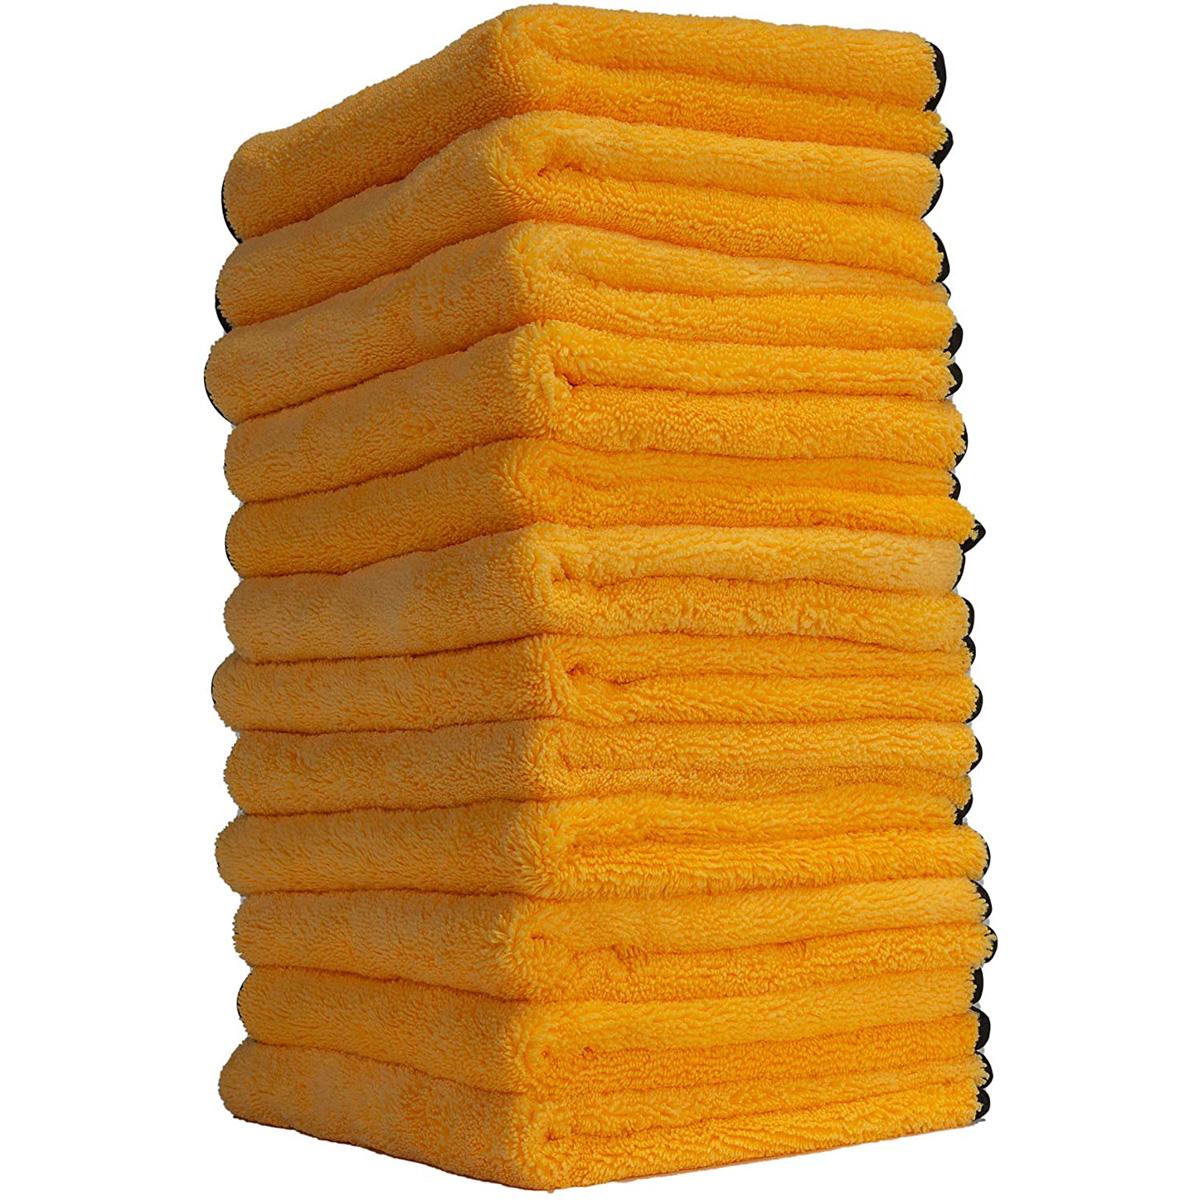 12 Chemical Guys 16x16 Premium Microfiber Towels for $13.23 Shipped